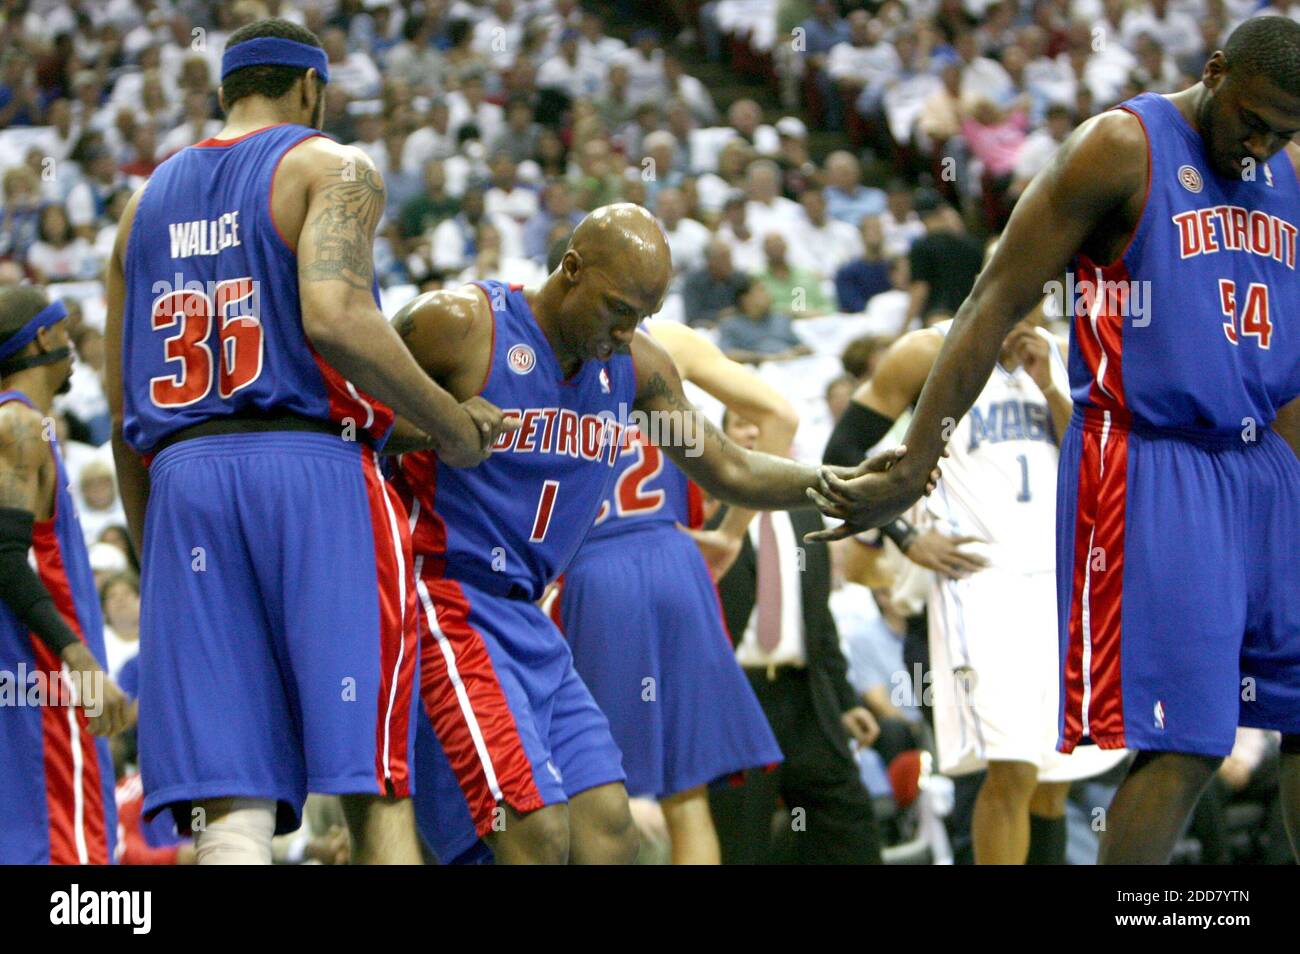 Detroit Piston's Chauncey Billups is helped up by Rasheed Wallace and Jason Maxiell during the first half in Game 3 of the NBA Eastern Conference semifinals against the Orlando Magic at the Amway Arena in Orlando, FL, USA on May 7, 2008. Photo by Gary W. Green/Orlando Sentinel/MCT/Cameleon/ABACAPRESS.COM Stock Photo